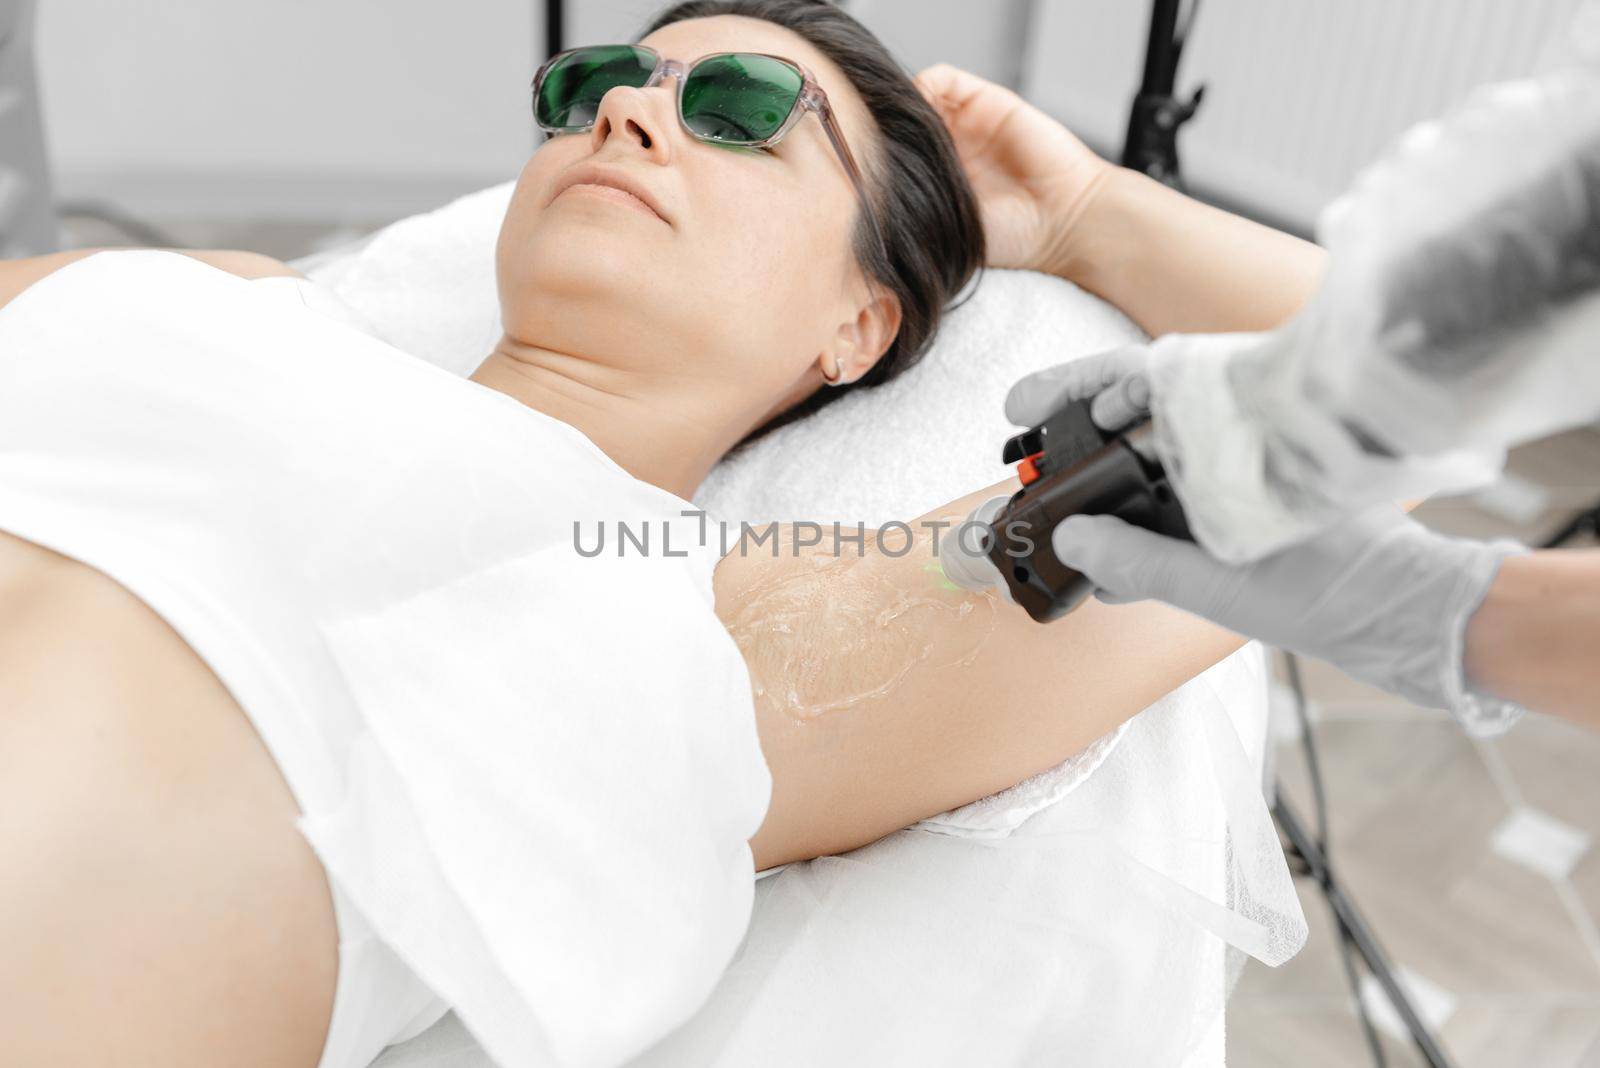 Laser hair removal process. Woman during laser hair removal of armpits and underarms in beauty center. Laser hair removal concept